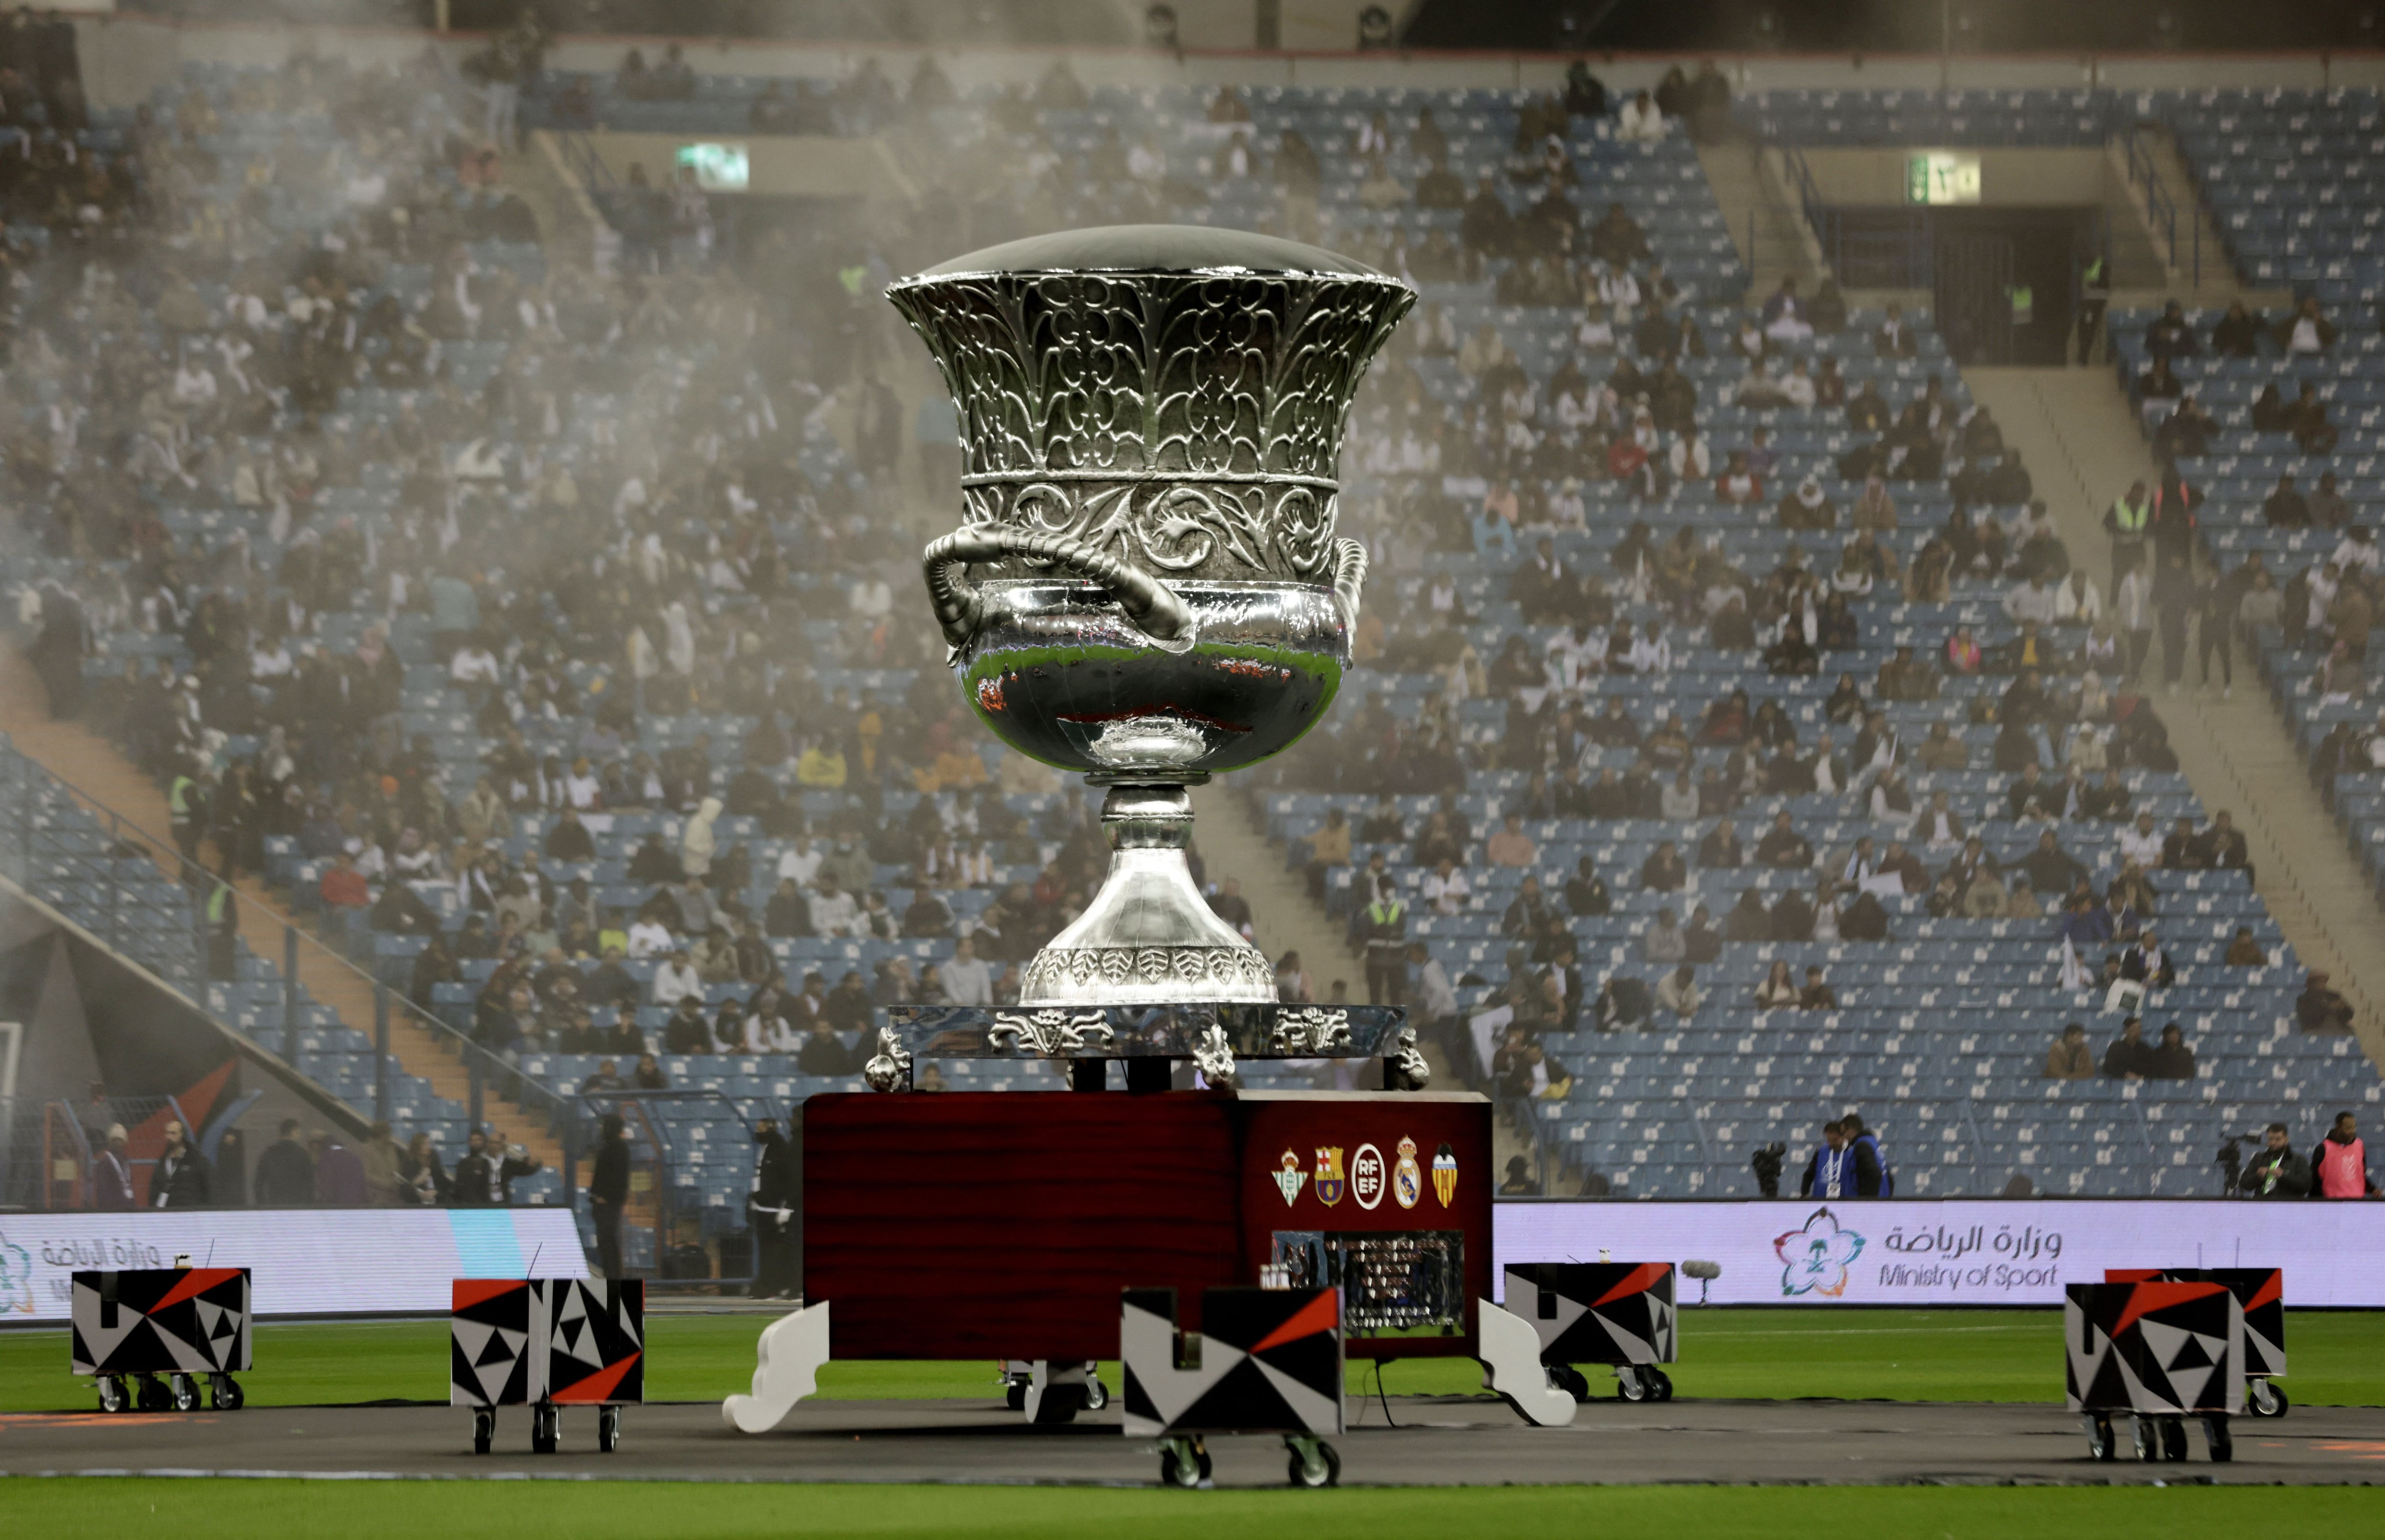 The biggest trophy in world soccer?